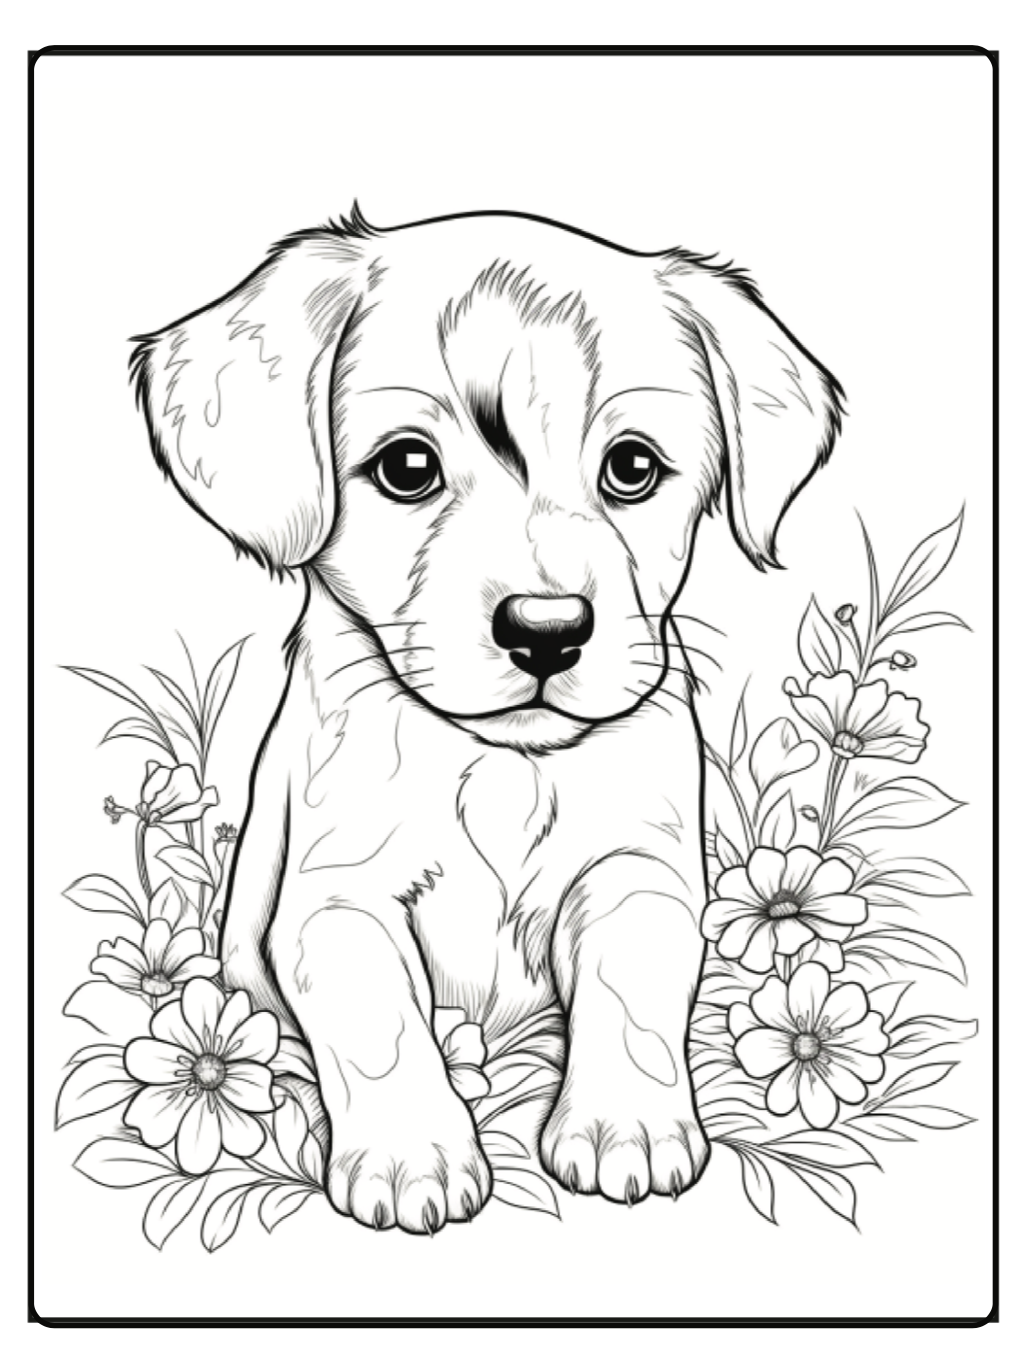 Pawsome Adventures: A Dog Coloring Book for Kids - Coloring eBooks